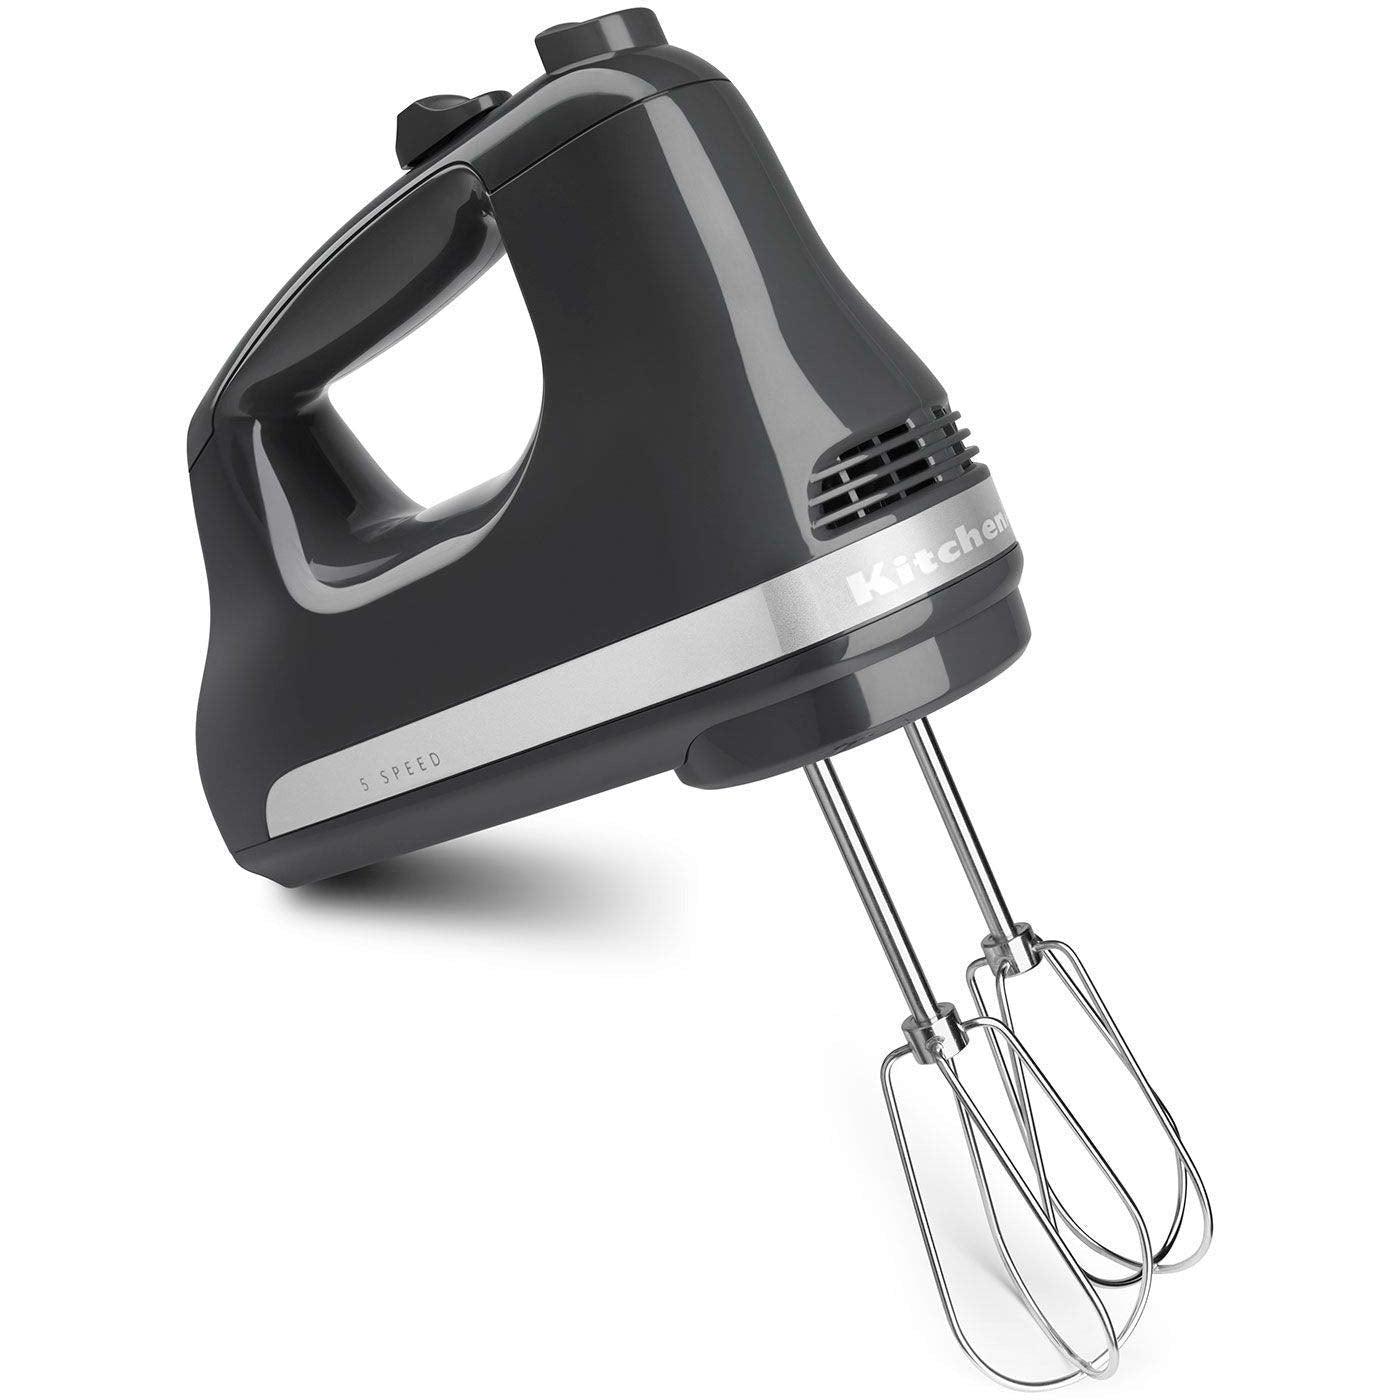 Electric Handheld Egg Whisk Blender Home Kitchen Food Mixer Egg Beater 7  Speed Food Mixer Table Stand Cake Dough Stir Mixer Electric Hand Mixer -  China Electric Hand Mixer and Cake Mixer